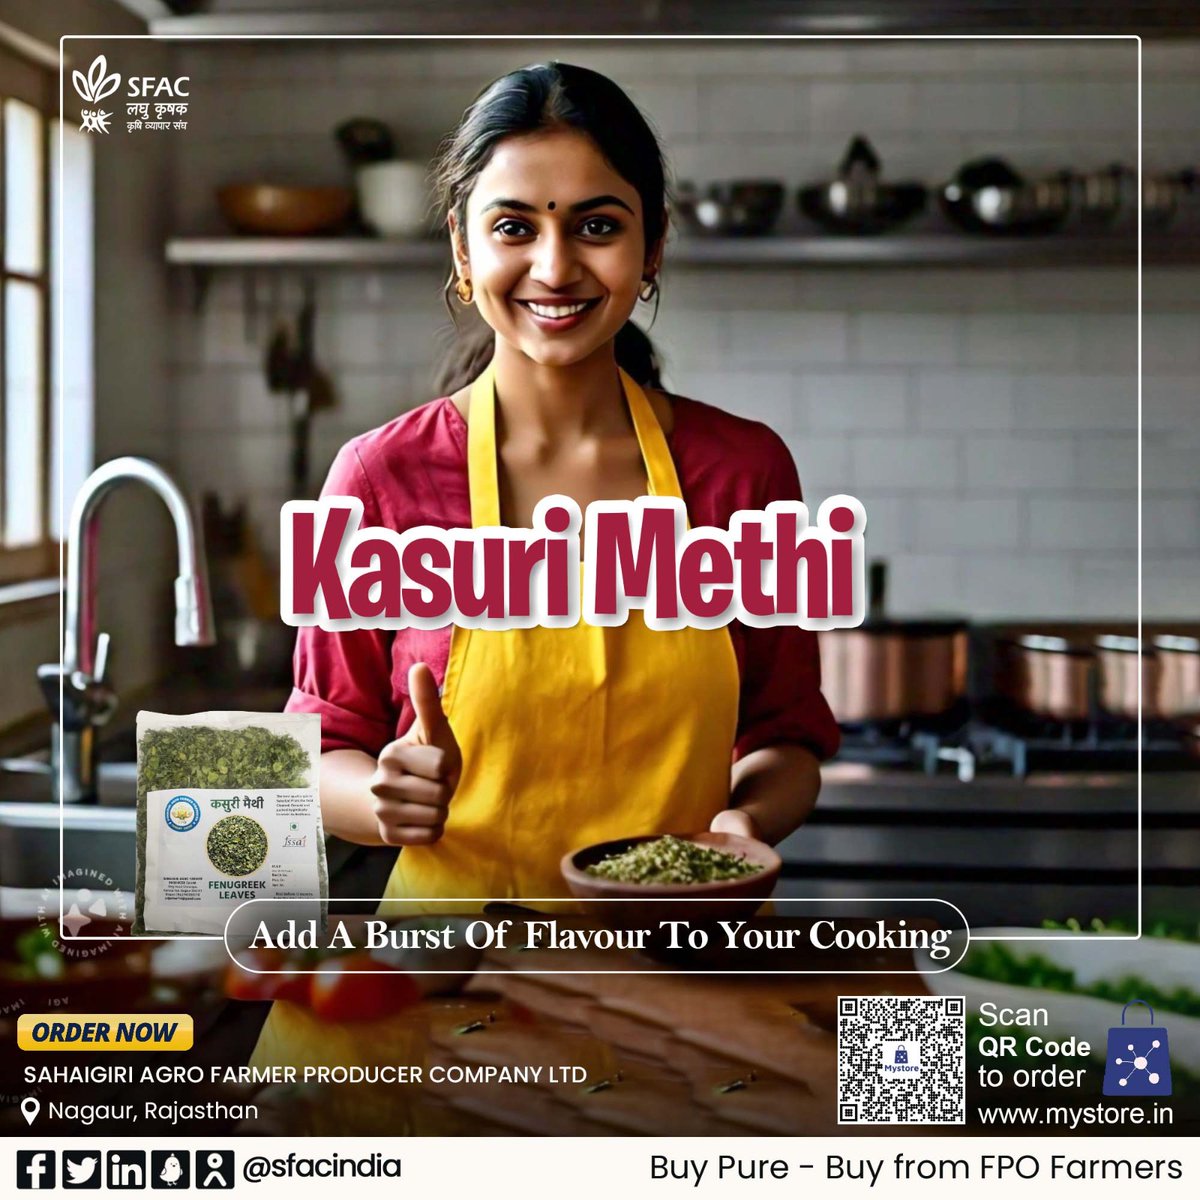 Adulteration-free, pure & naturally grown kasuri methi. Packed with aromatic flavour & healthy goodness.

Buy only from FPO farmers at👇

mystore.in/en/product/kas…

🌱
@AgriGoI @RajCMO @ONDC_Official @PIB_India @mygovindia #VocalForLocal #healthyeating #healthyhabit #HealthyChoices